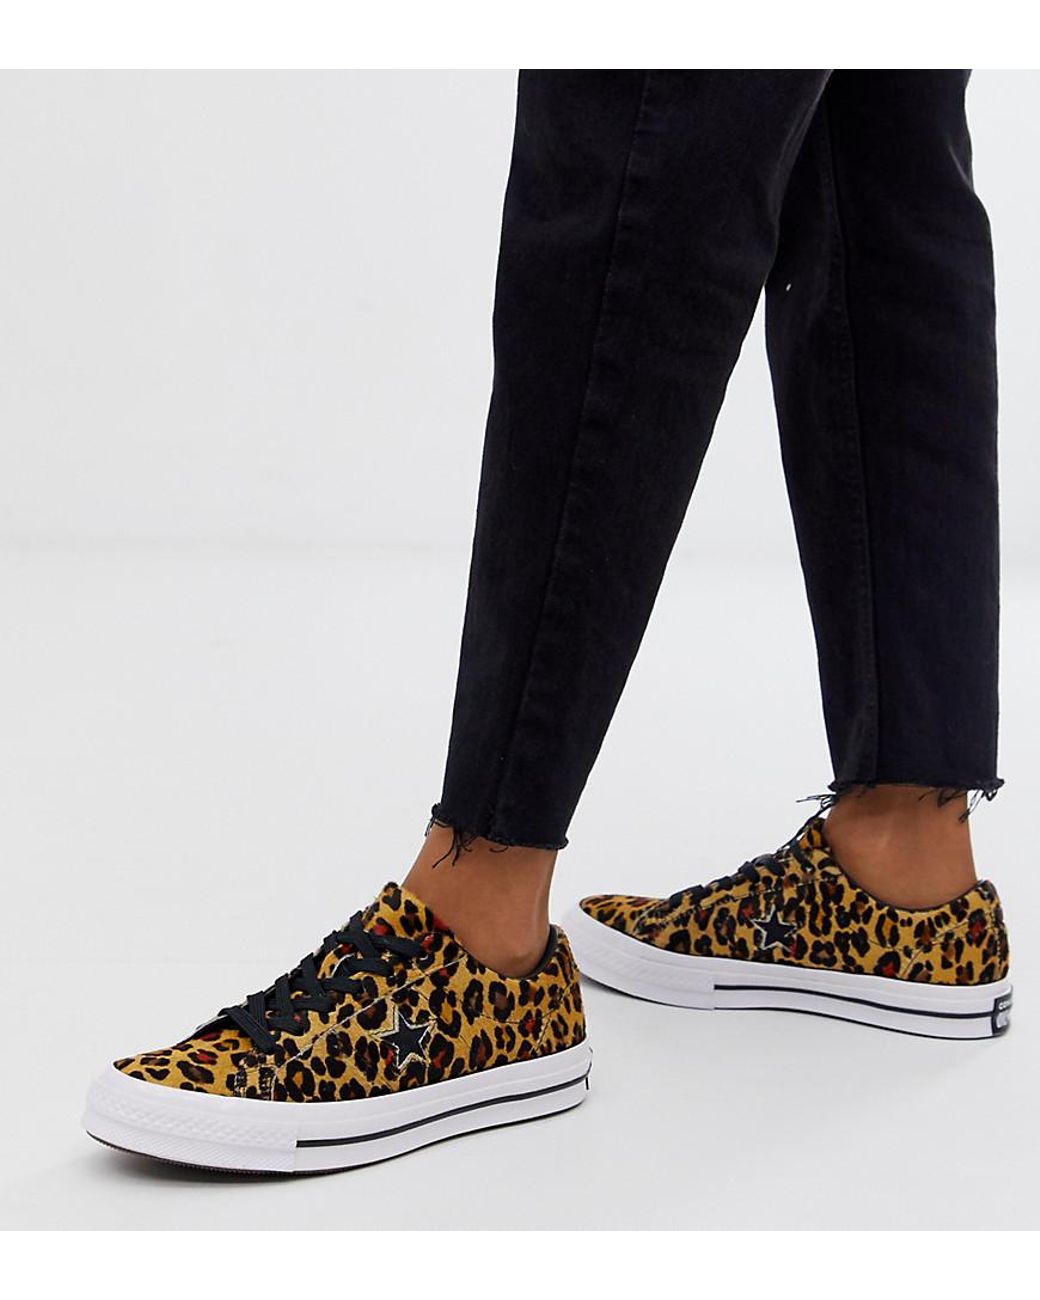 Converse One Star Pony Hair Leopard Print Trainers | Lyst